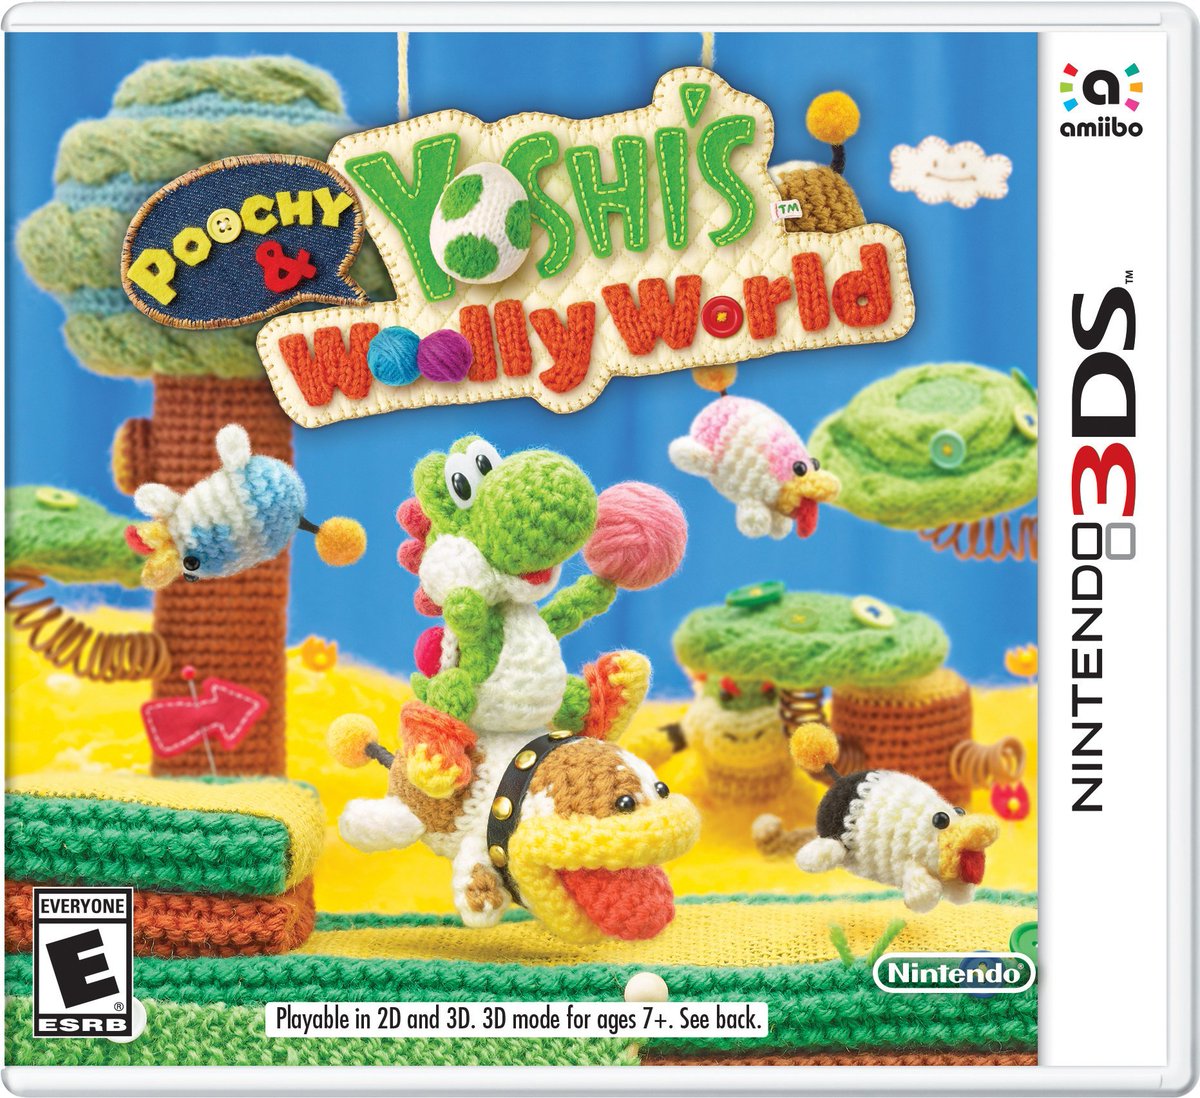 Still haven't forgiven Nintendo for releasing a Yoshi game that starts with 'Poochy' so I gotta put it next to the P games and not the Y games on the shelf